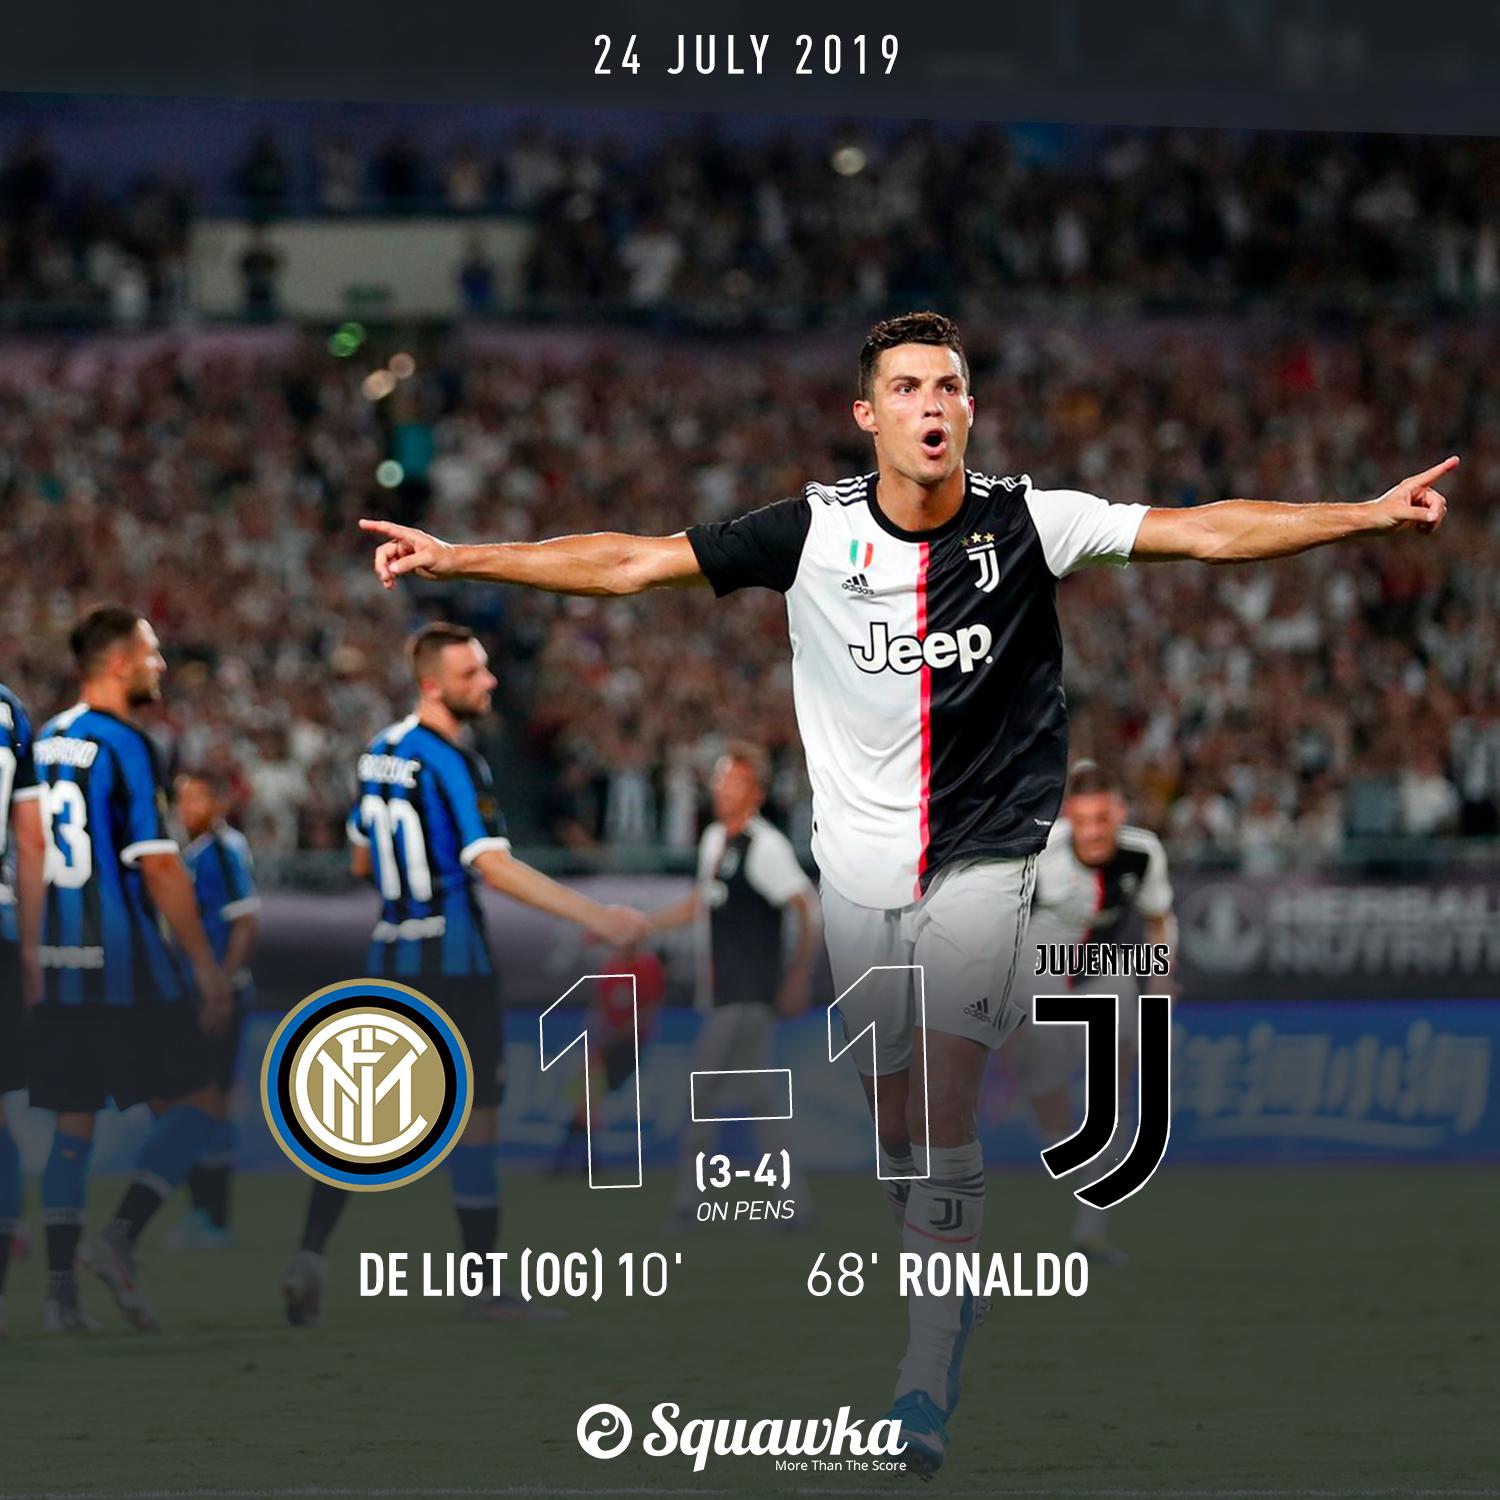 Juventus Wins Their First match With a Free Kick Goal From Cristiano Ronaldo